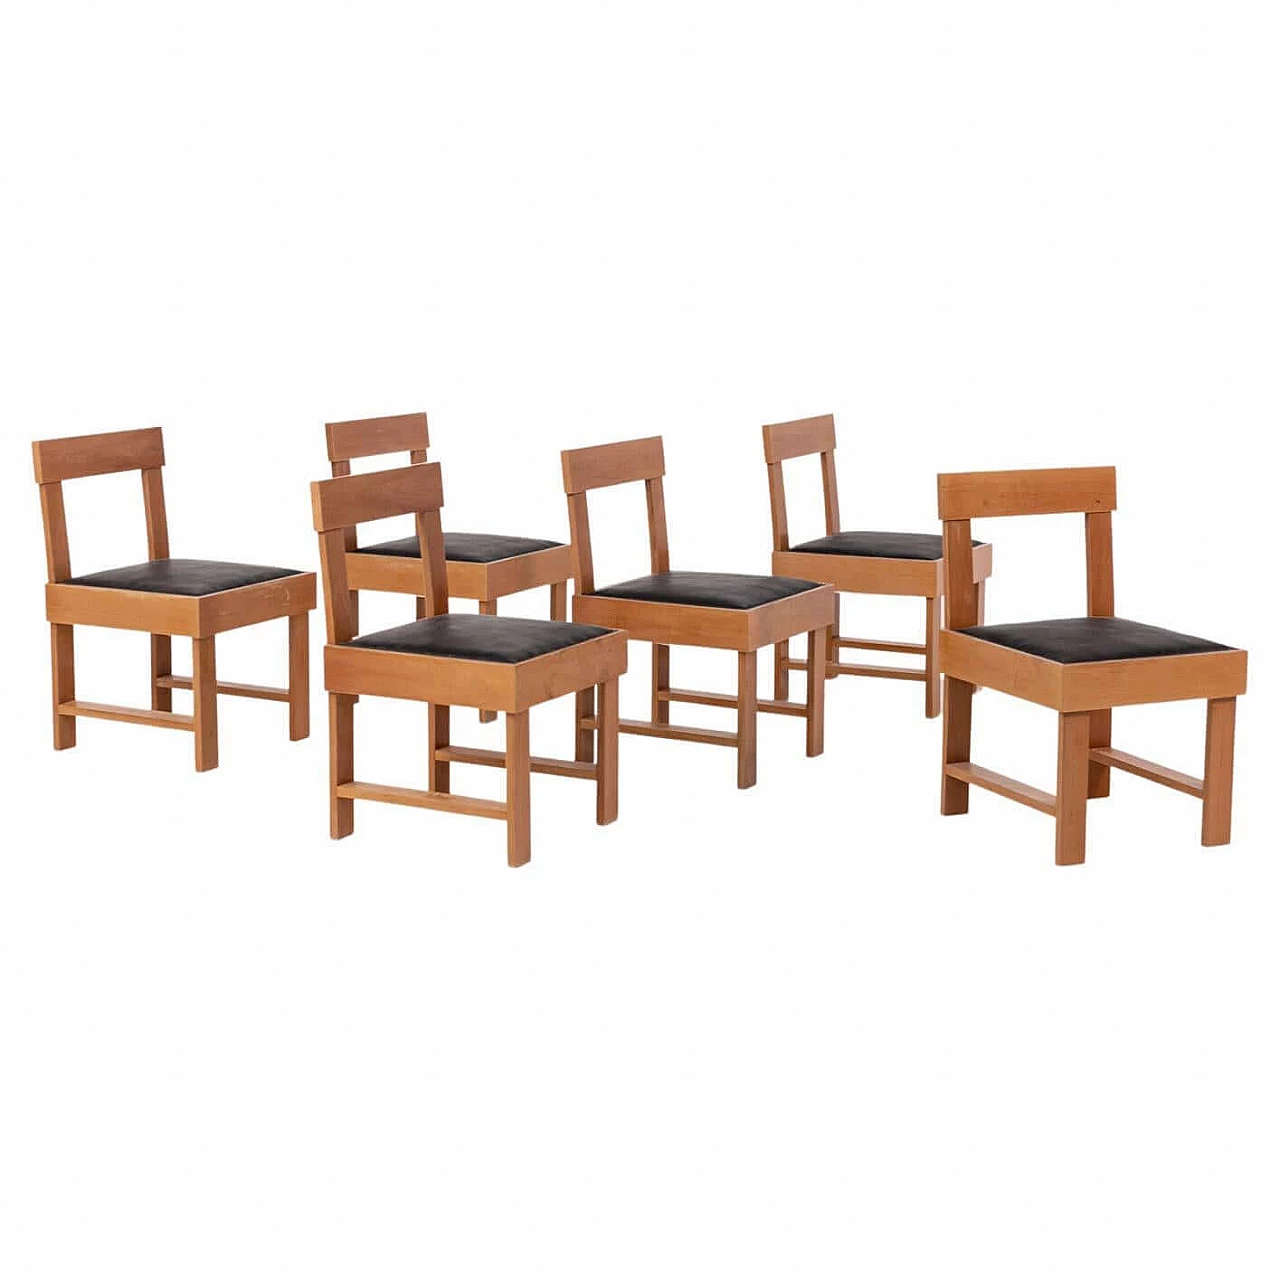 6 BBPR Studio chairs in wood and black leather, 1940s 1386828